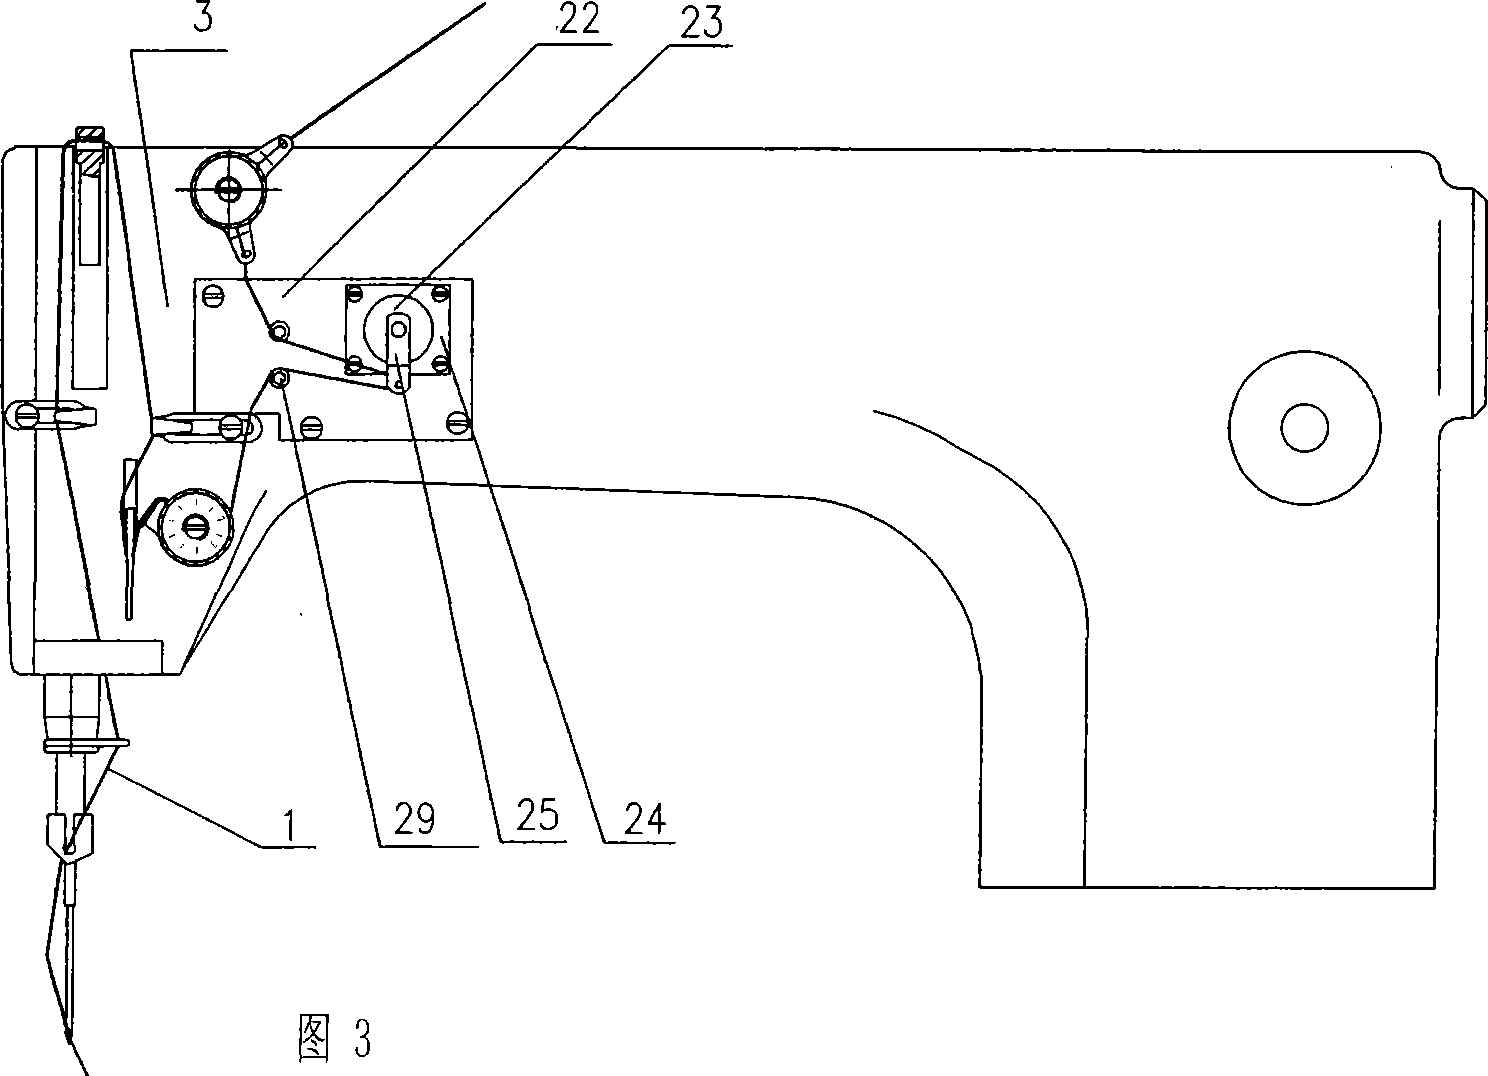 Trapping device of computerized seam plaining machine